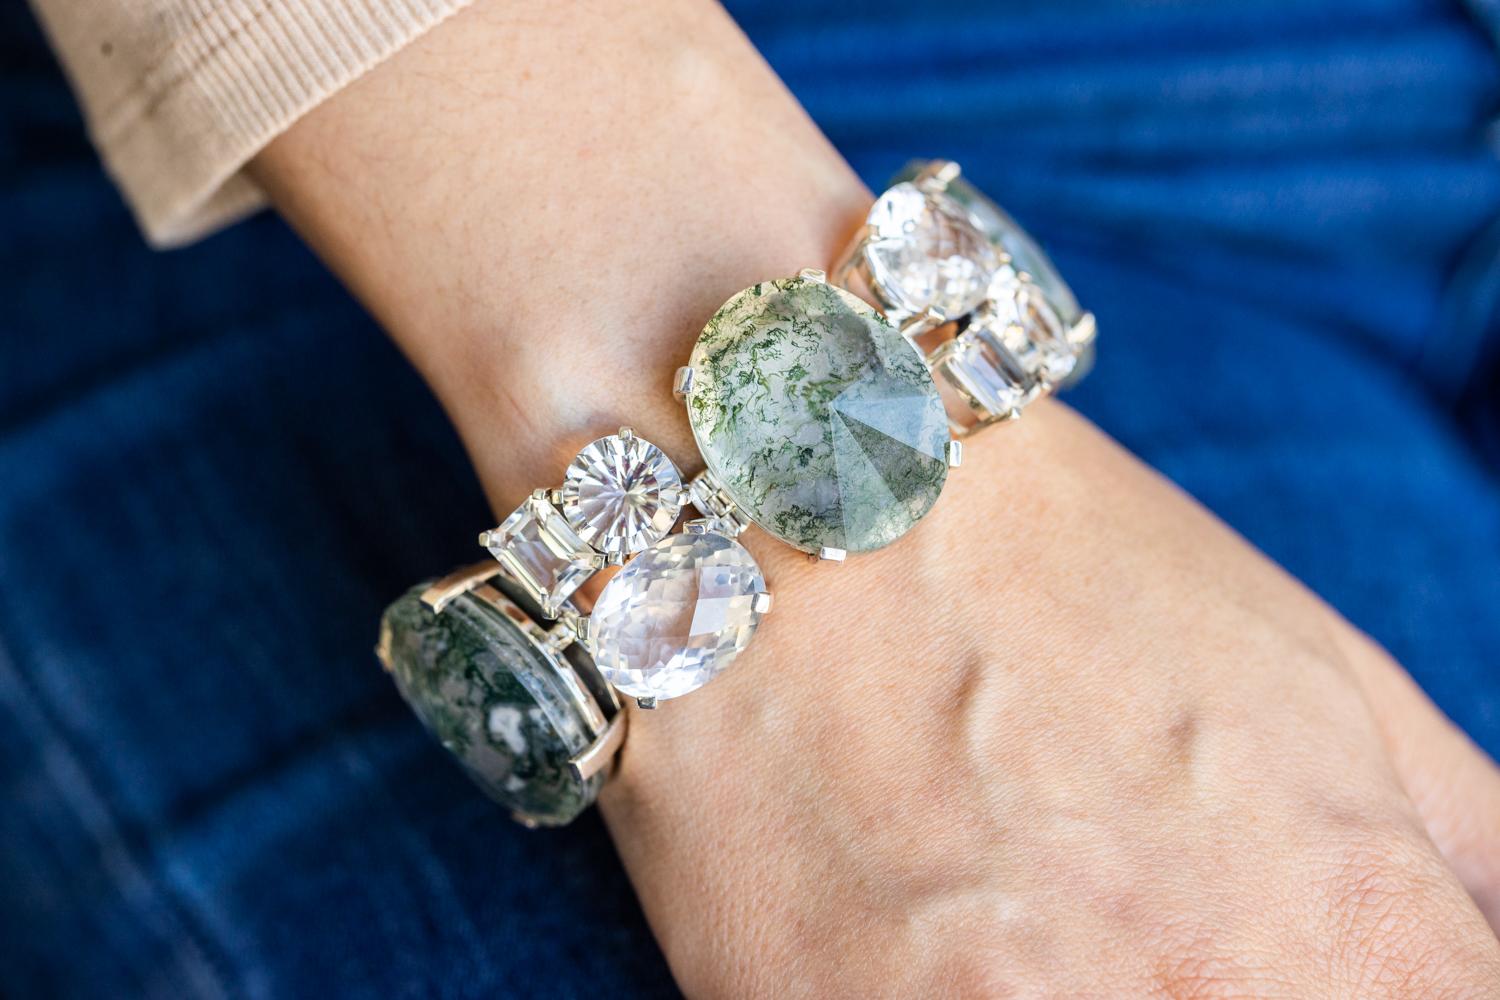 The natural quartz and faceted moss agate bracelet by Stephen Dweck beautifully showcases his expertise in combining unique gemstones with sterling silver. This bracelet features alternating natural quartz and moss agate stones, each faceted to